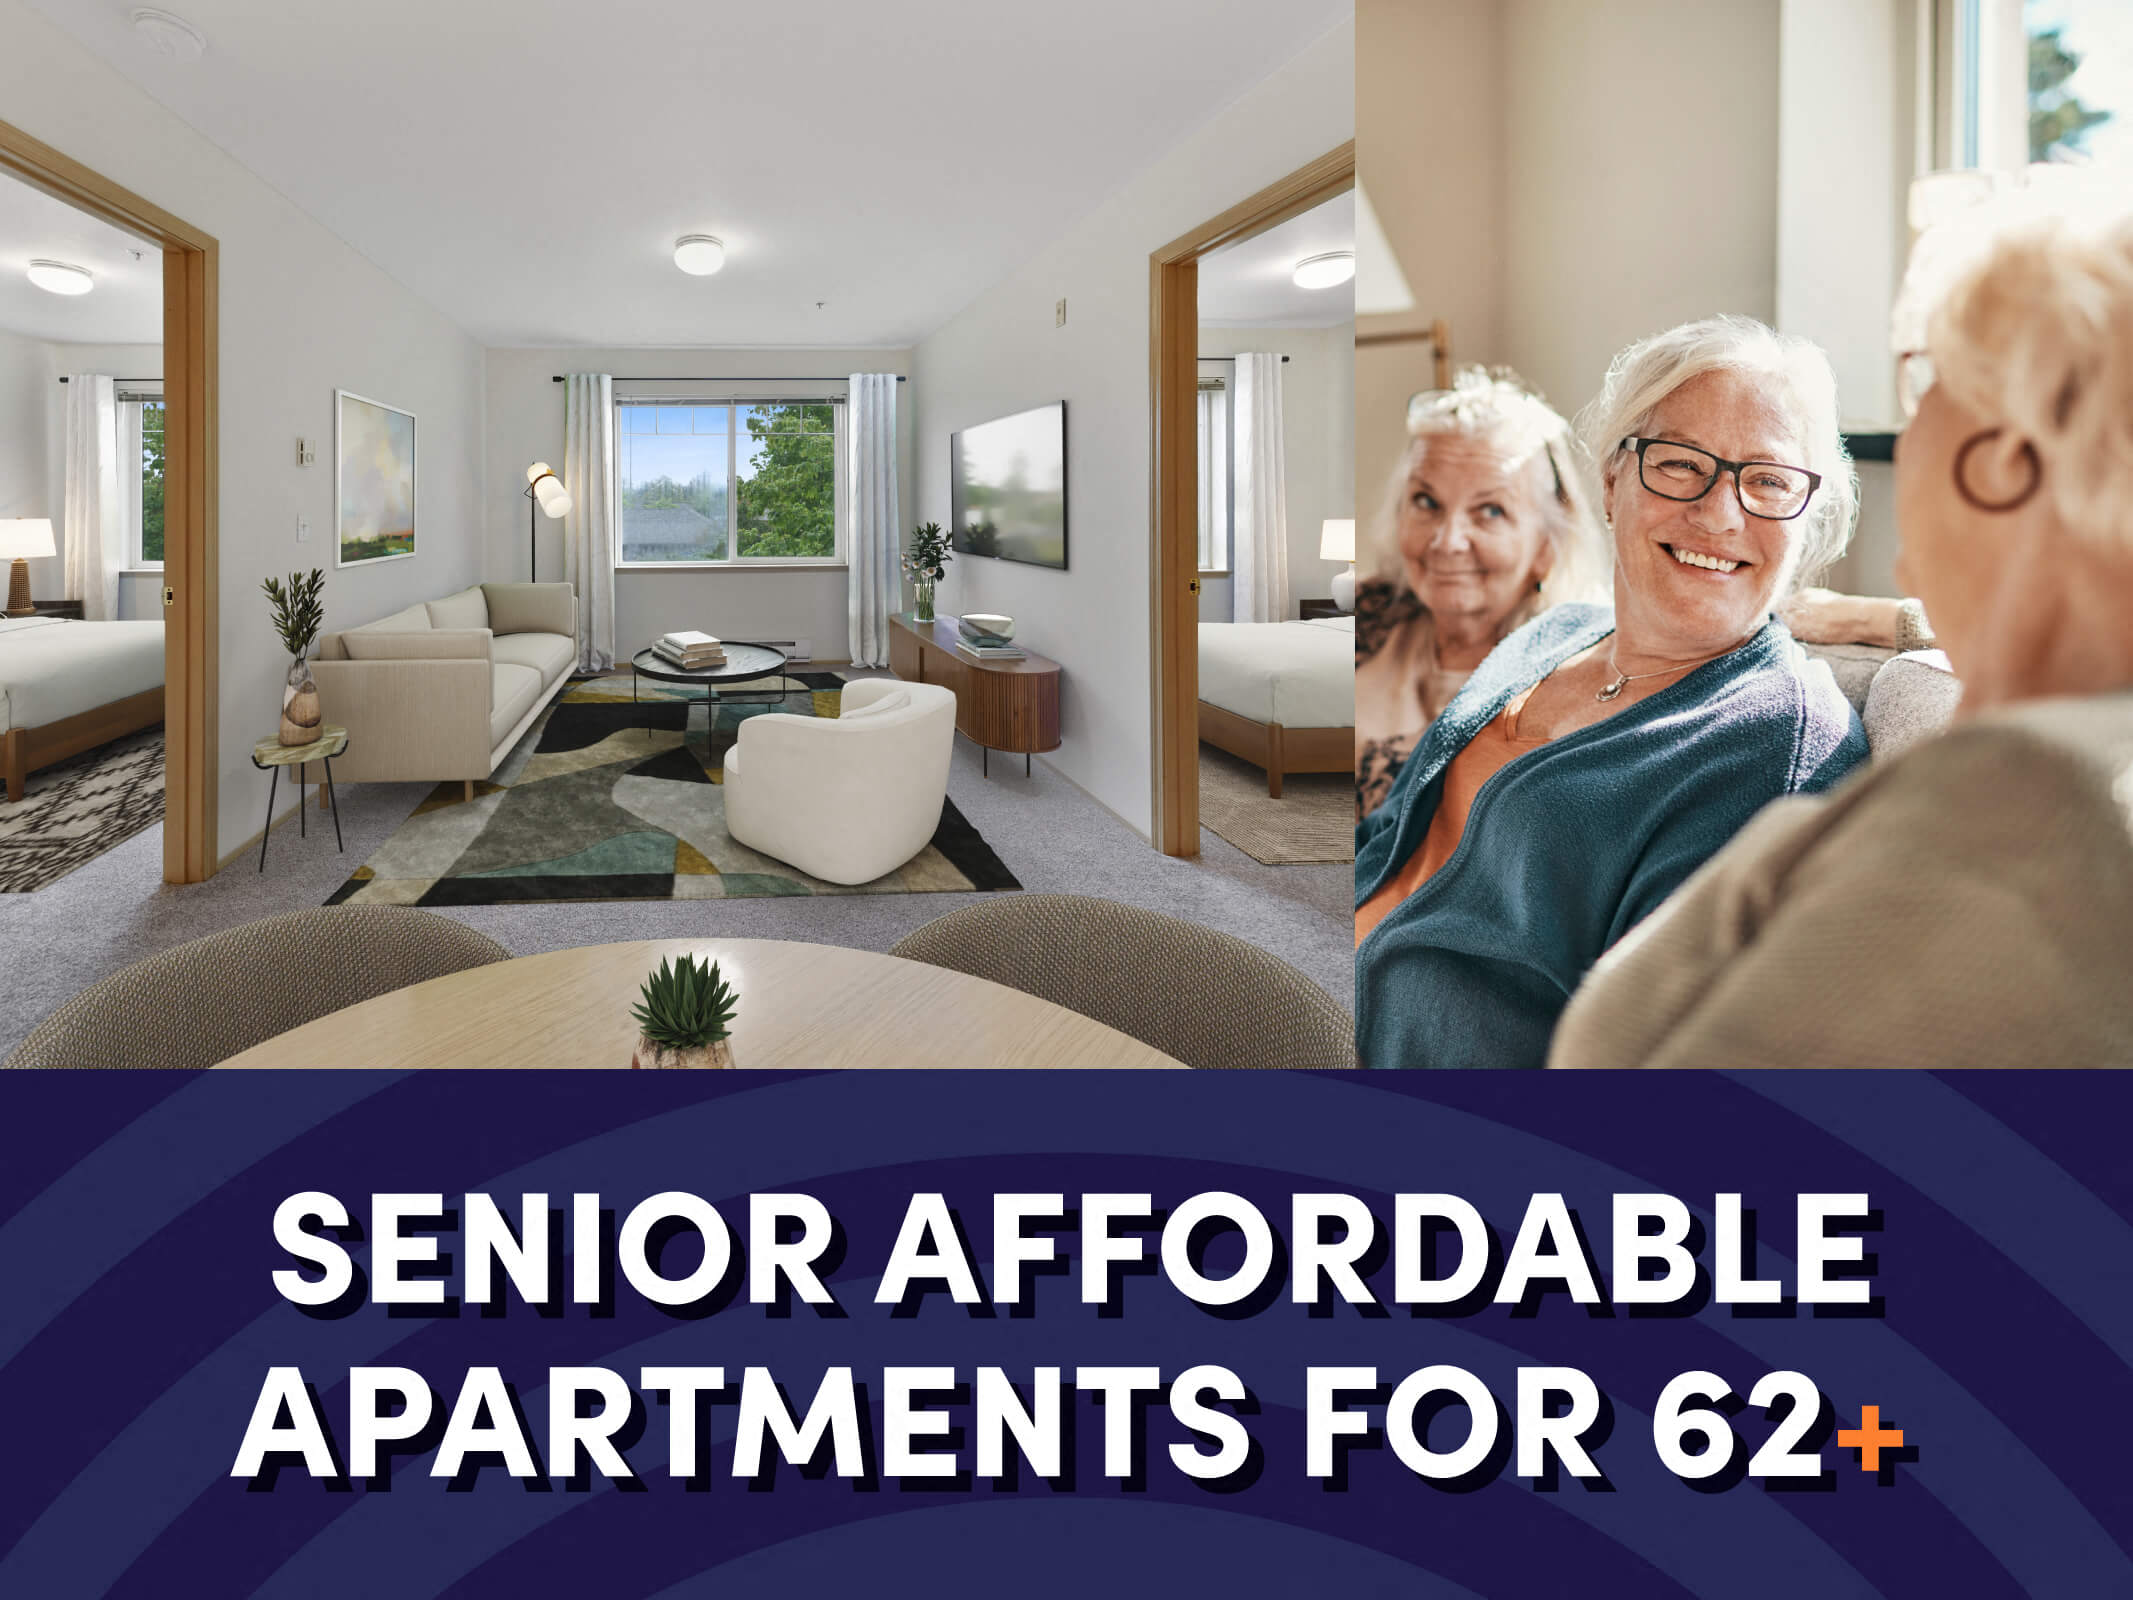 An image of a living room next to an image of three seniors sitting side by side above text that reads “Senior Affordable Apartments for 62+” for the Lakewood Meadows Senior Affordable Apartments in Lakewood, Washington.